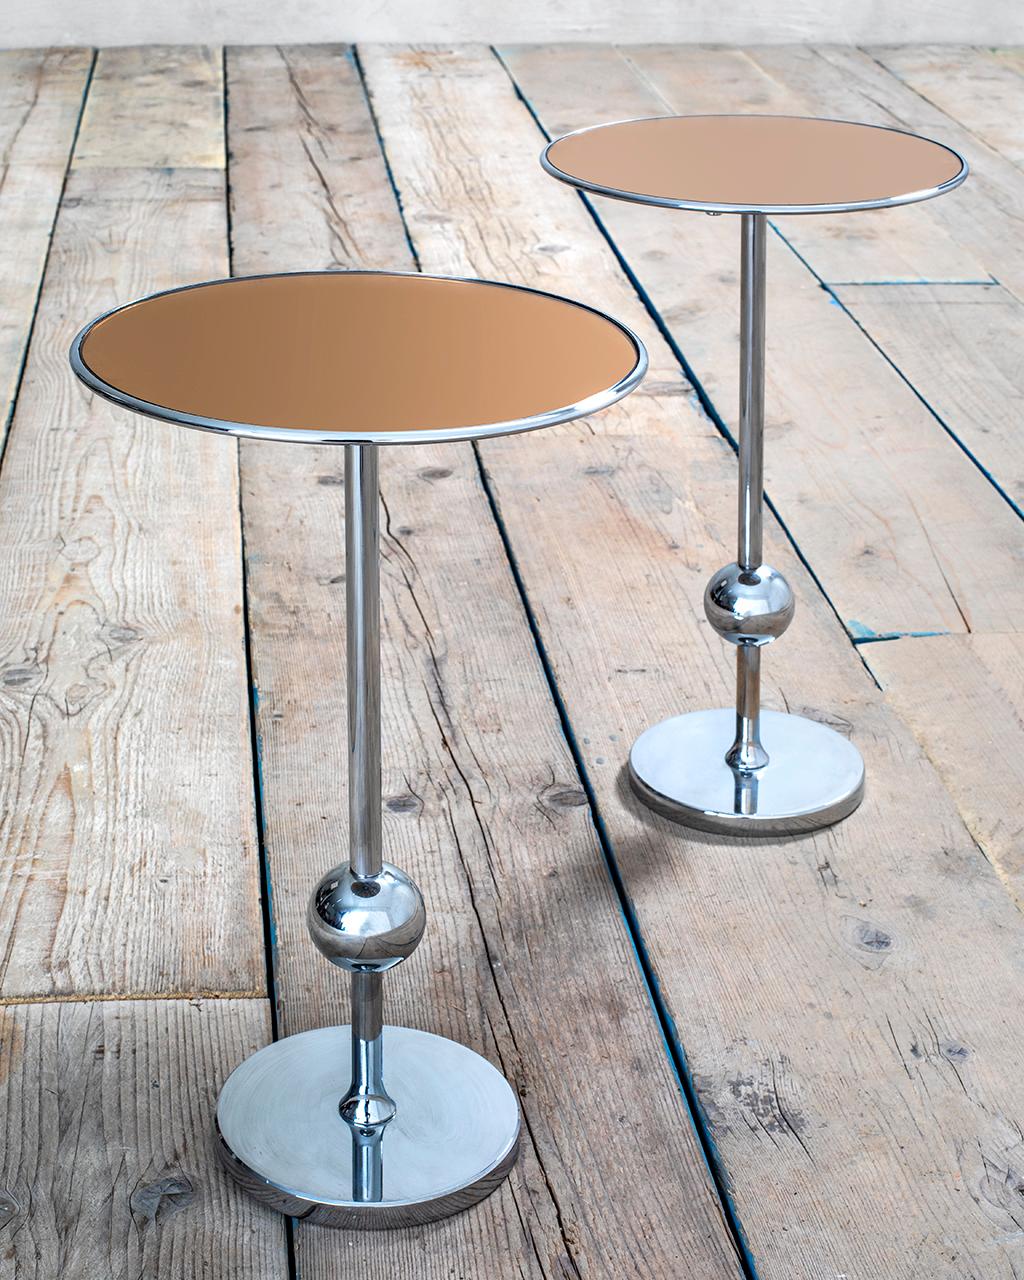 Pair of side tables or low tables model T1 by Osvaldo Borsani for Tecno. Osvaldo Borsani designed these pieces of furniture between 1948 and 1950. T1 is 45 centimeters high and has a chromed steel structure with the characteristic globe. 
The top